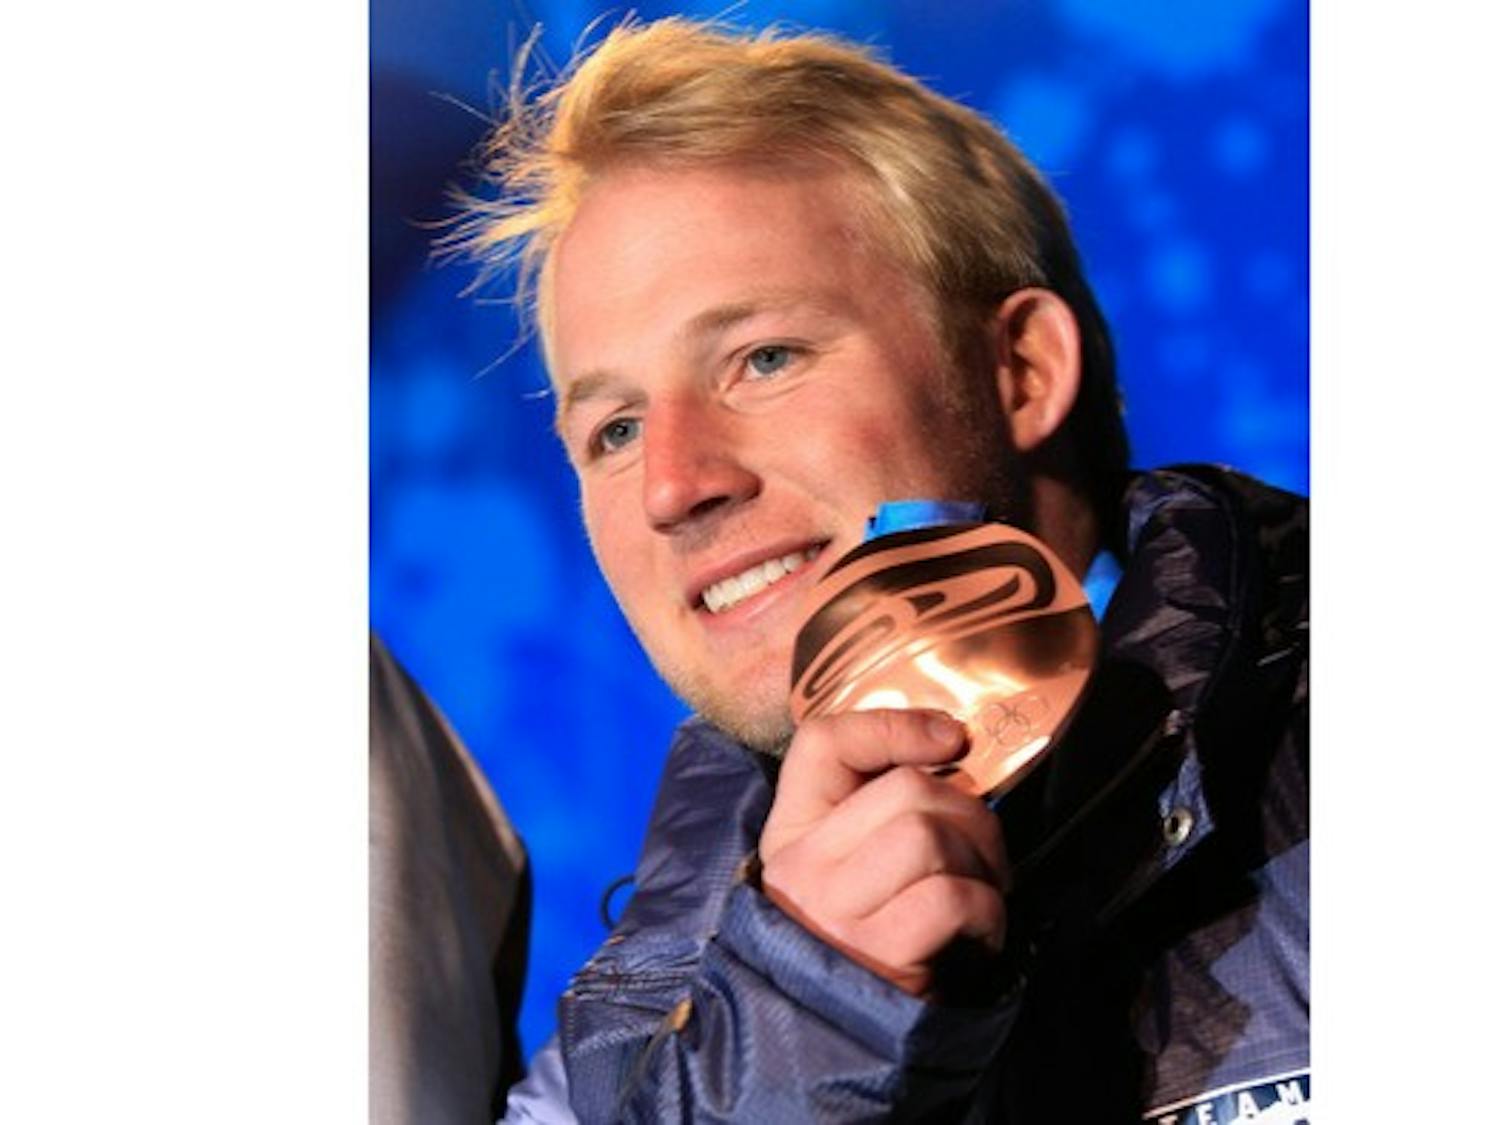 Andrew Weibrecht '09 placed third in the Super G competition at the Winter Olympic Games In Vancouver.